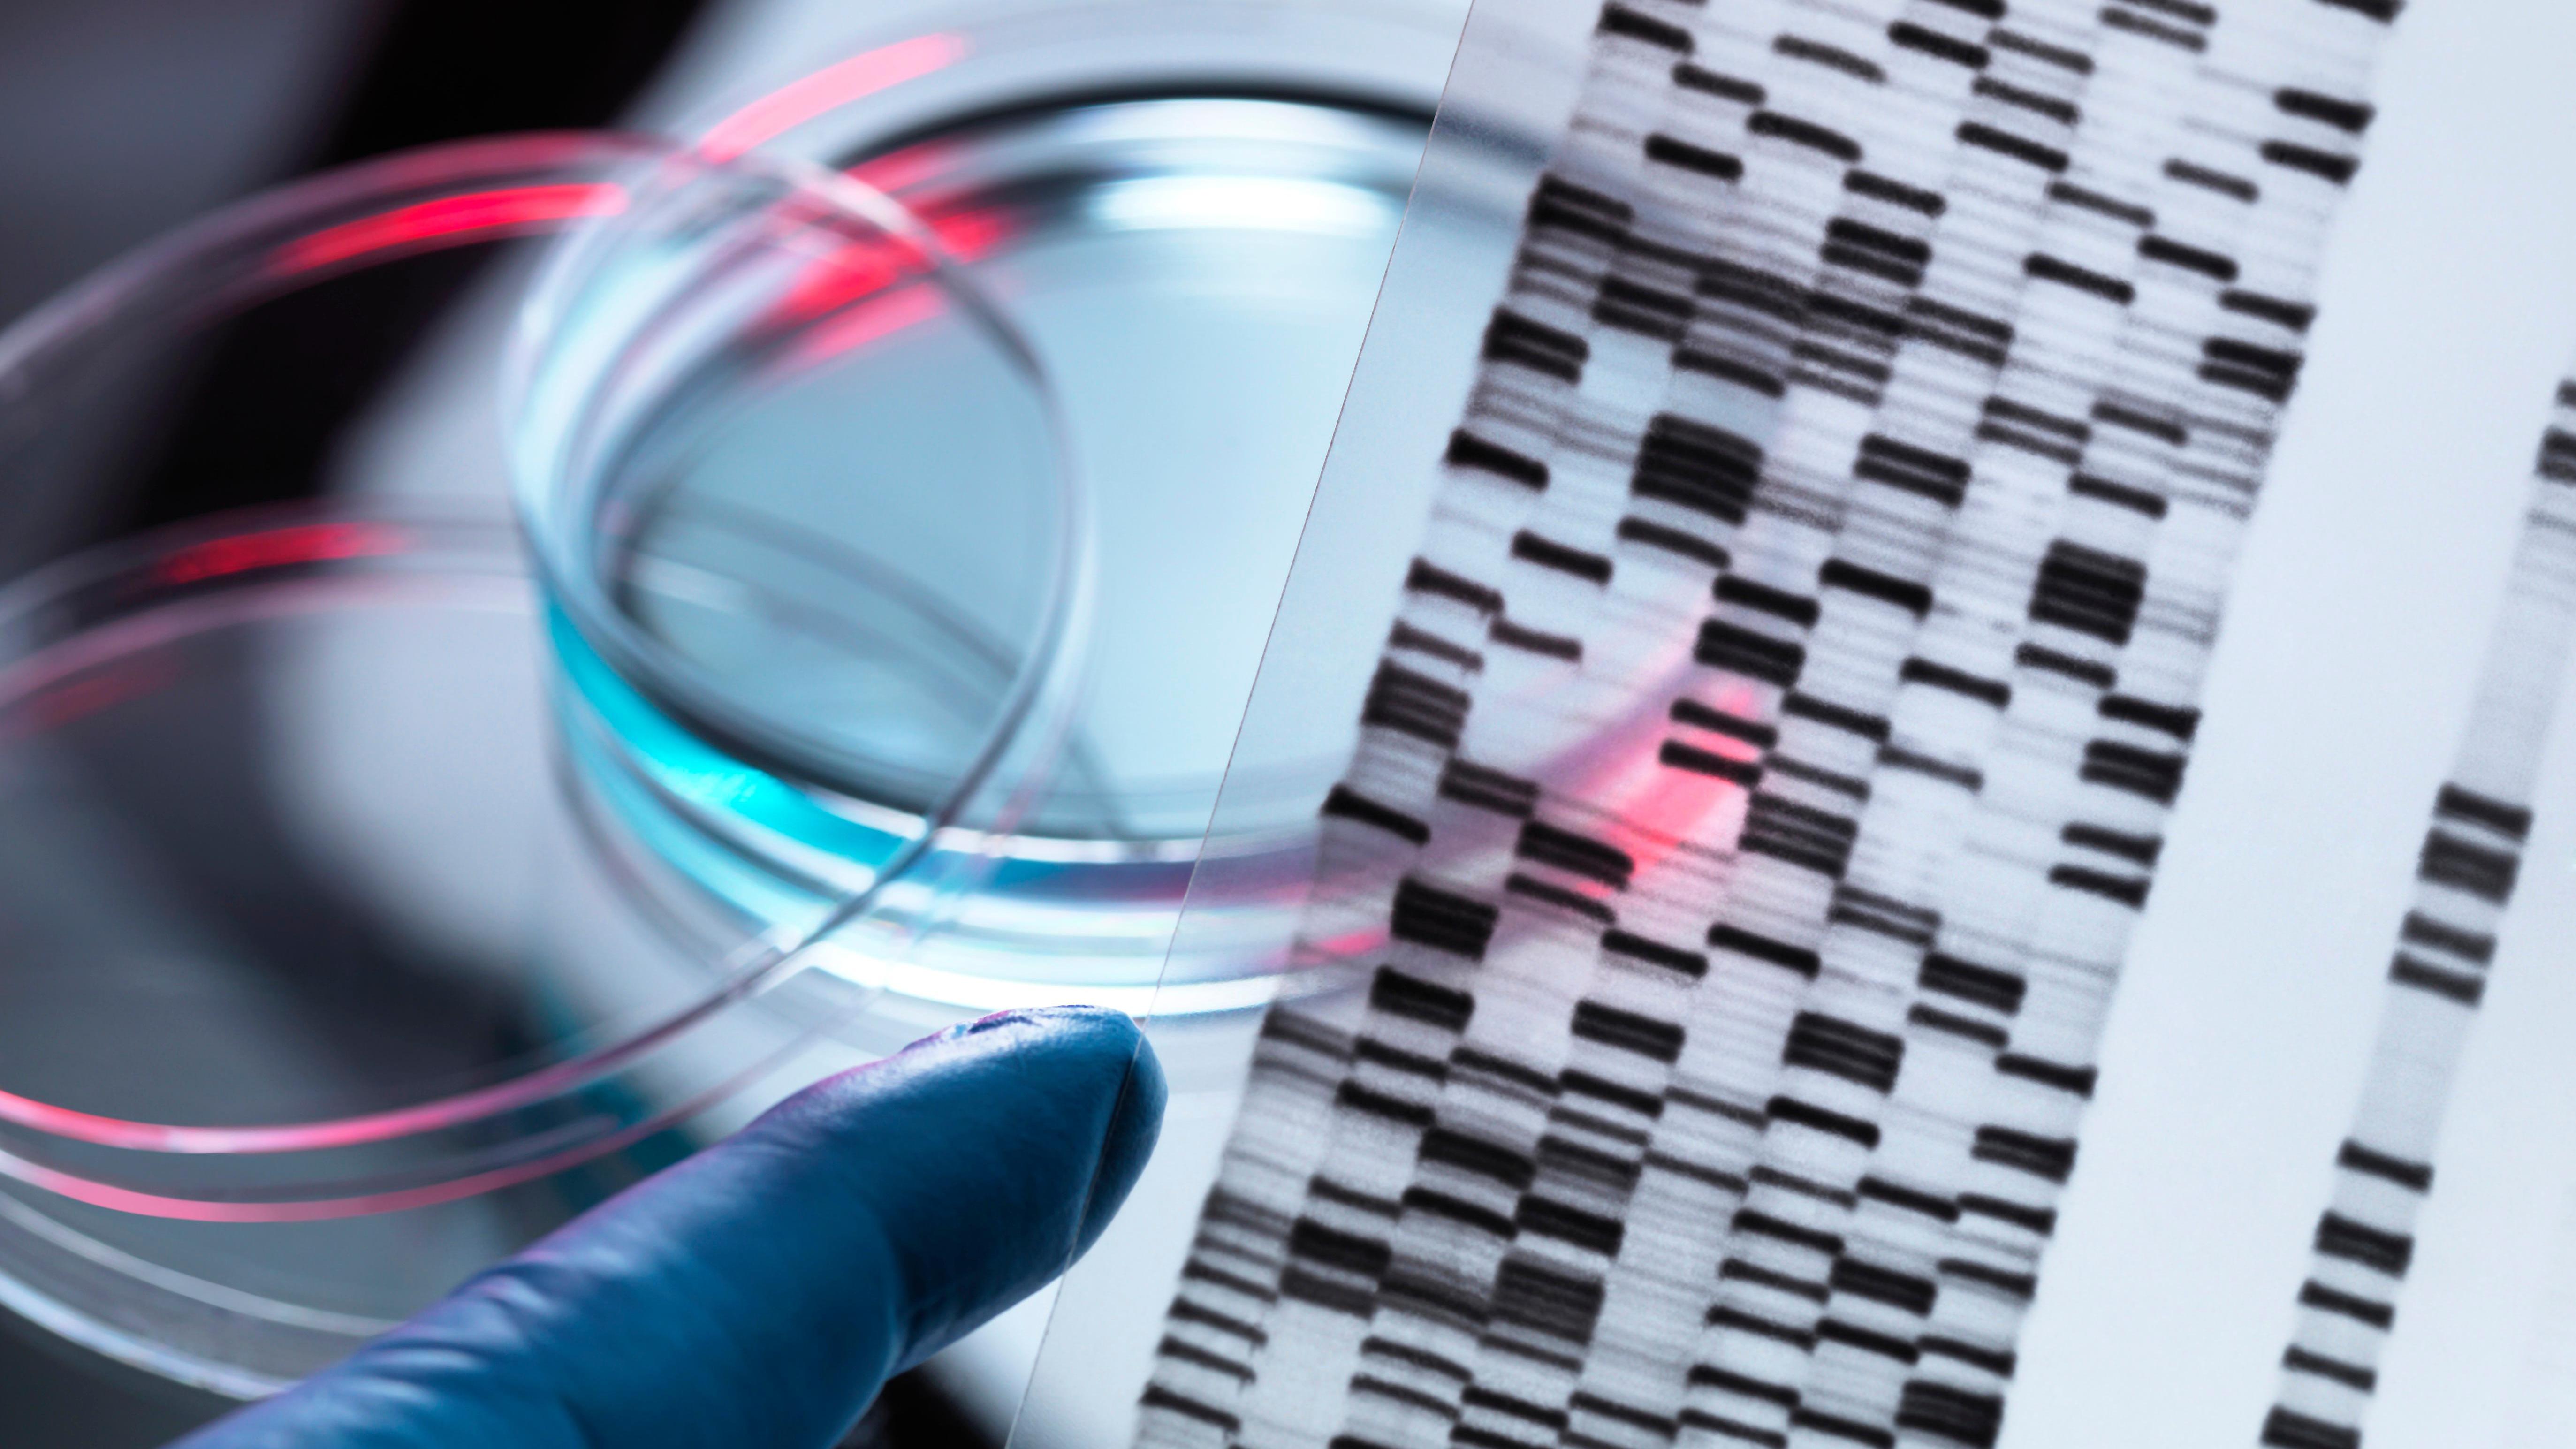 About five million adults will have their genetic profiles linked to health records